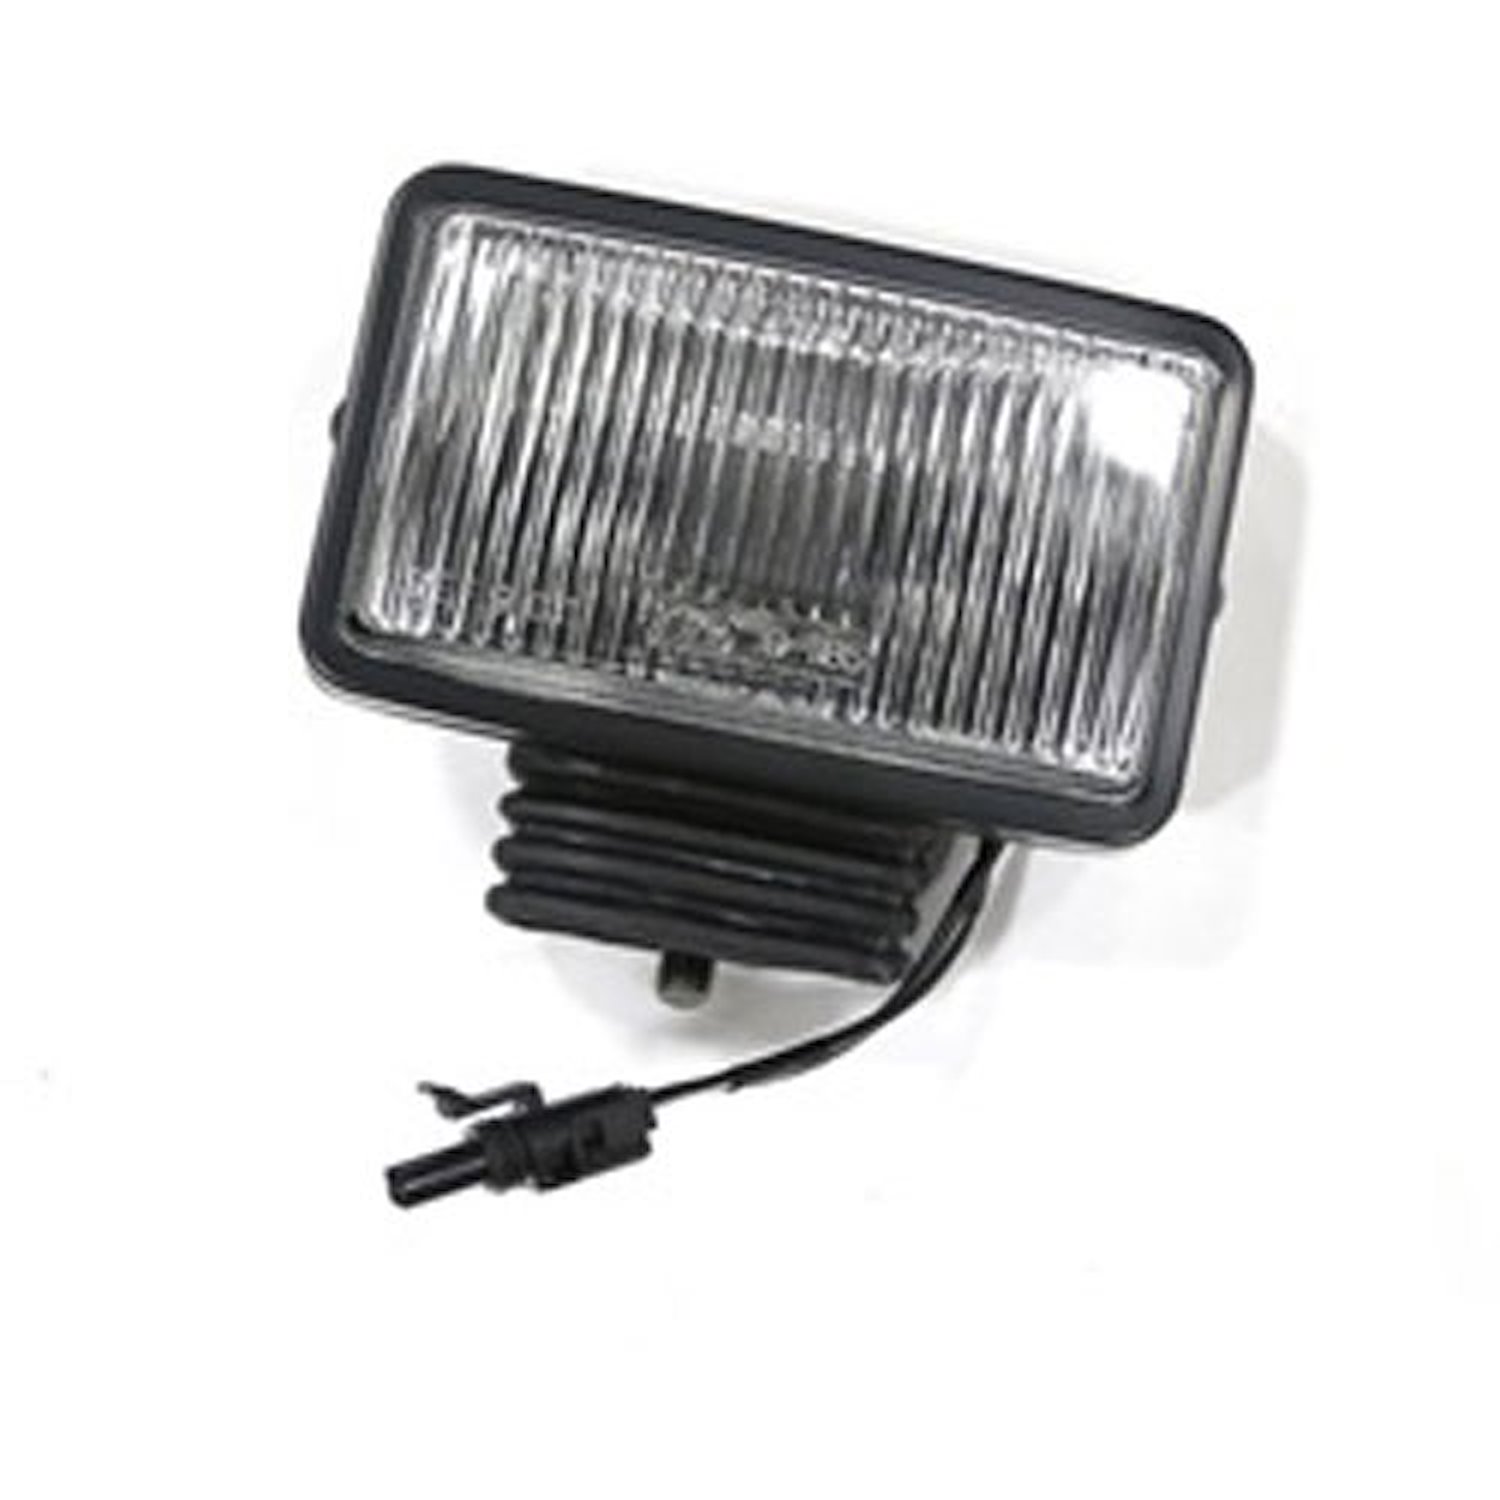 Replacement fog light from Omix-ADA, Fits left or right side on 87-96 Jeep Cherokees.